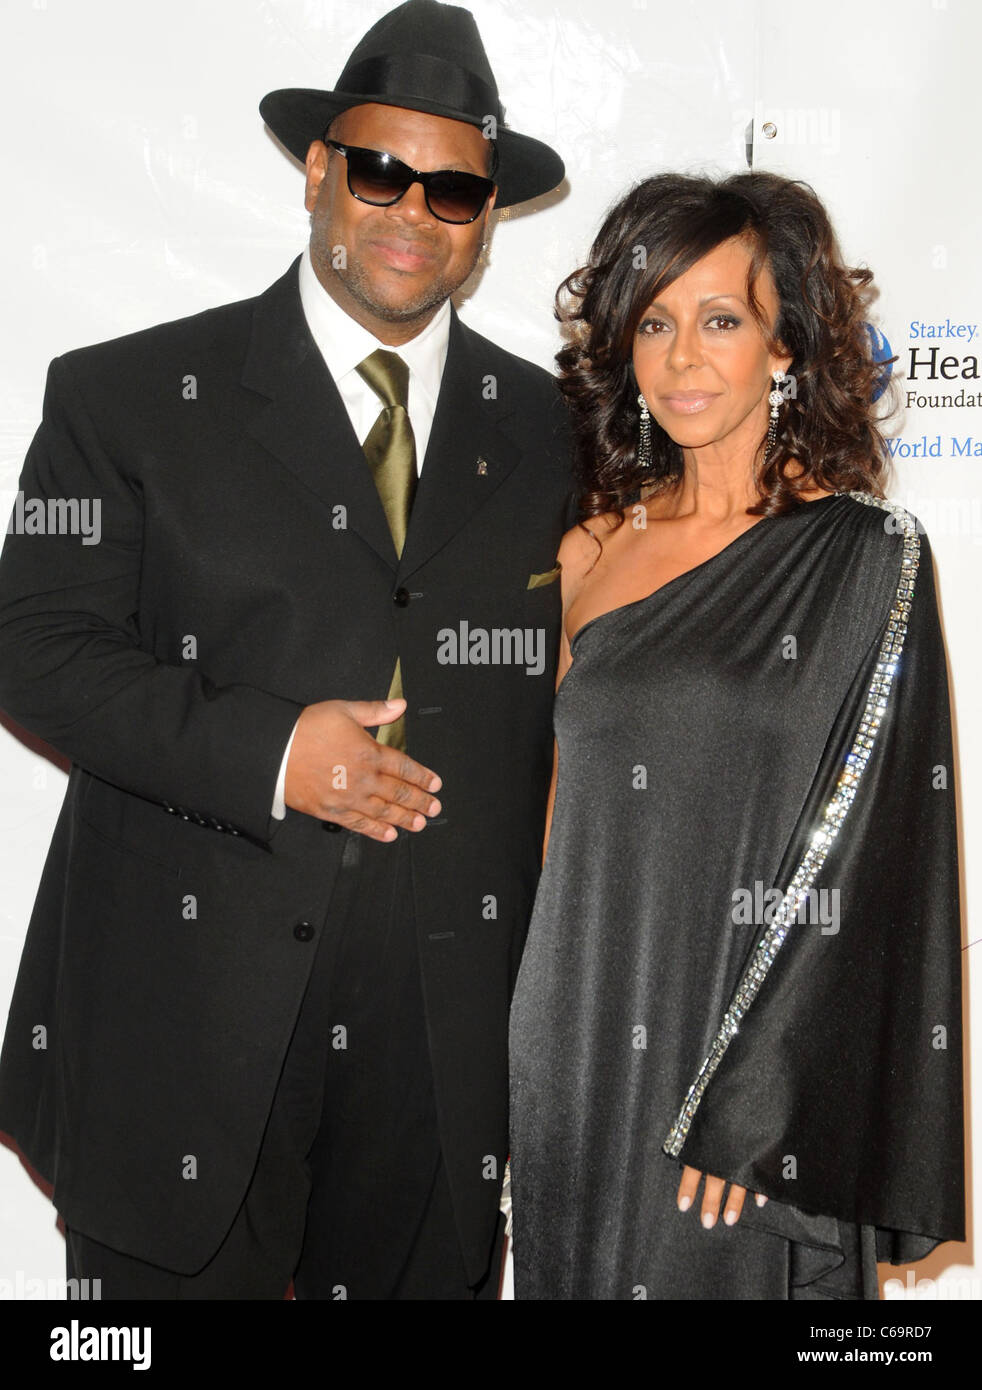 Jimmy Jam in attendance for 2011 MusiCares Person of the Year Ceremony, Los Angeles Convention Center, Los Angeles, CA February Stock Photo